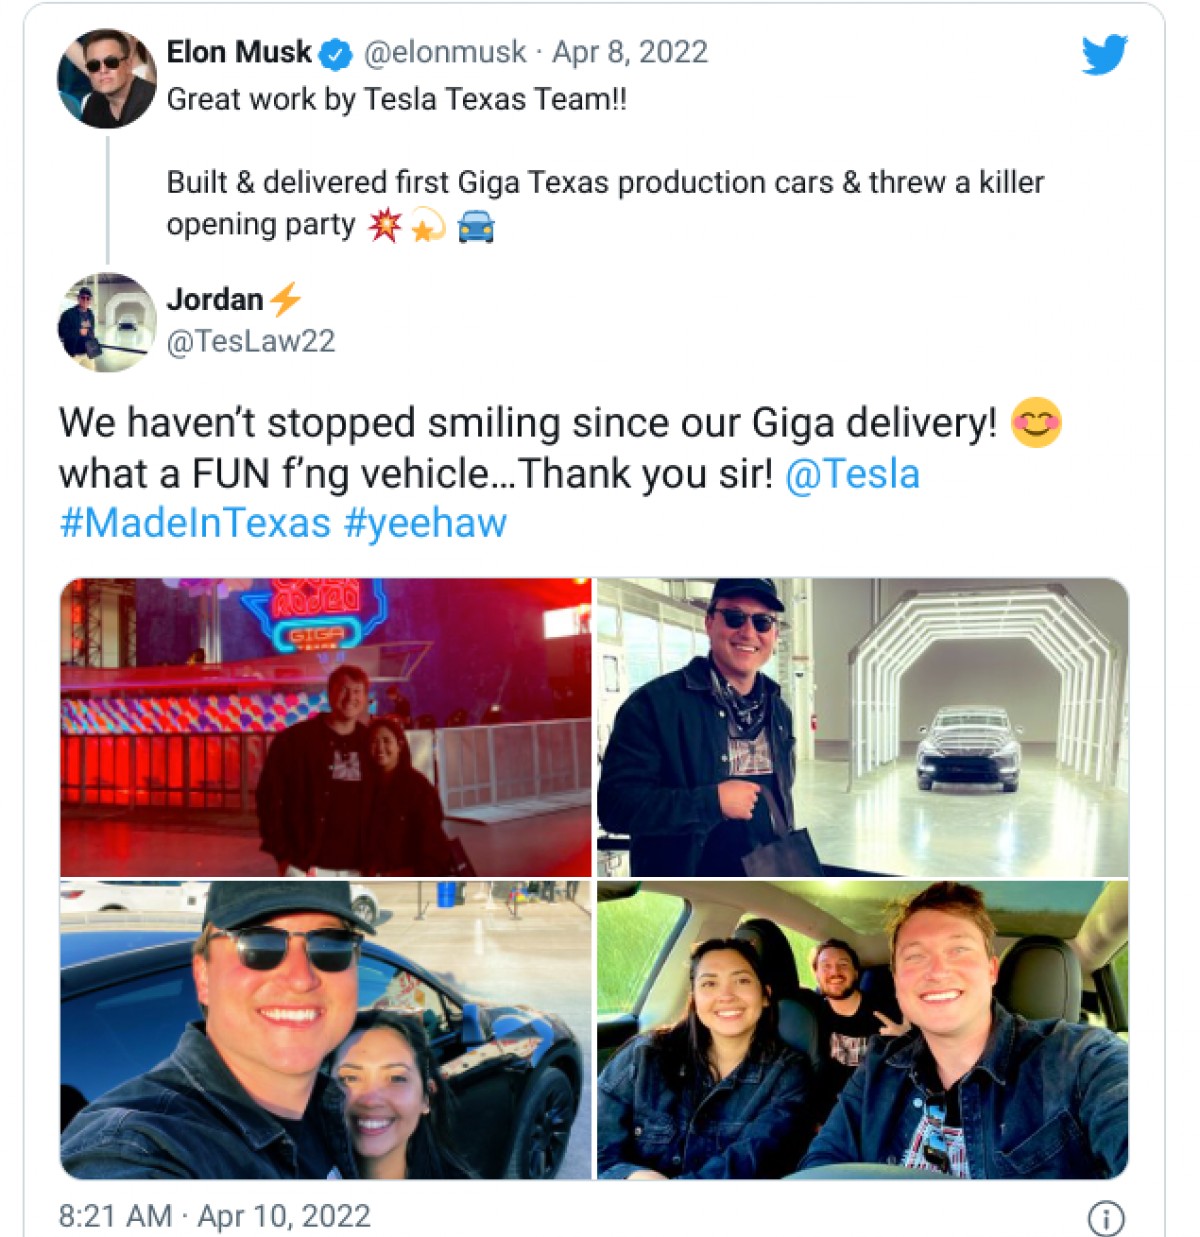 Tesla is not slowing down - deliveries from Giga Texas have started!